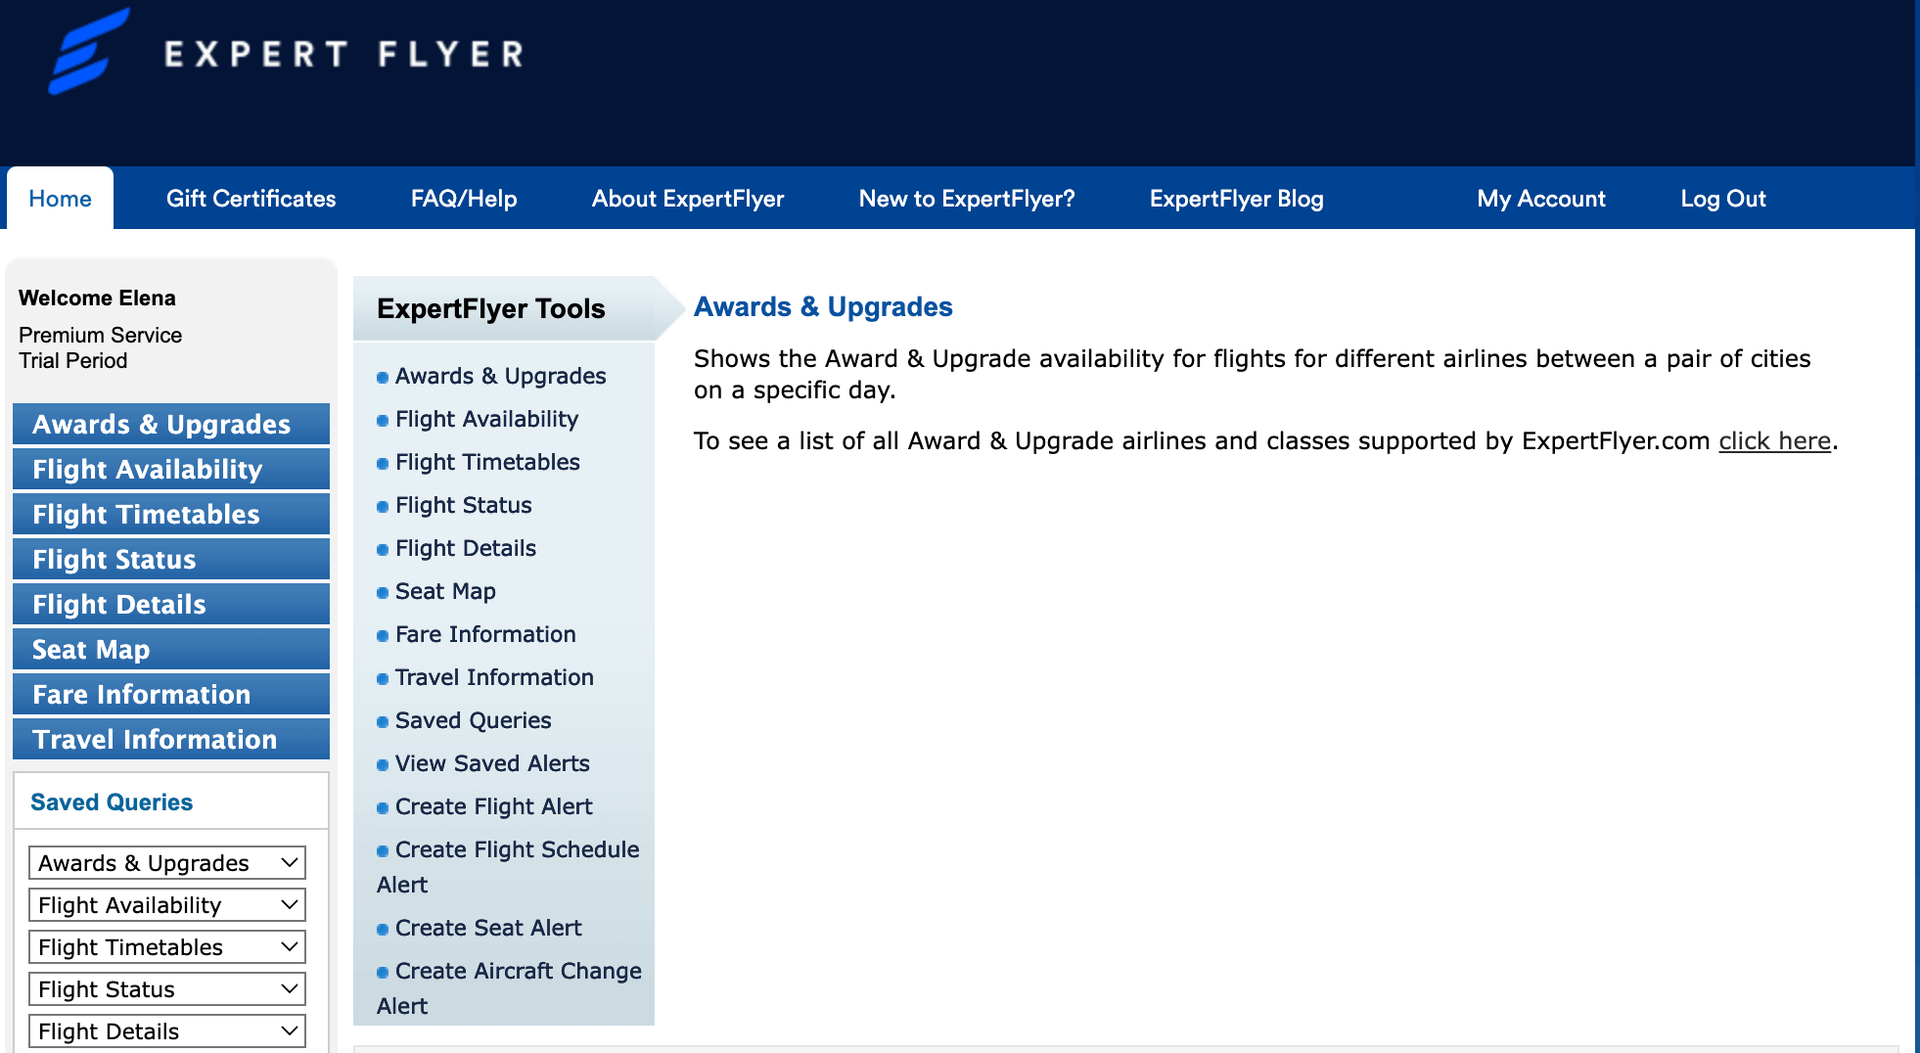 expertflyer.com home page login page menu of options on left side in blue search awards and upgrades flight seats timetables